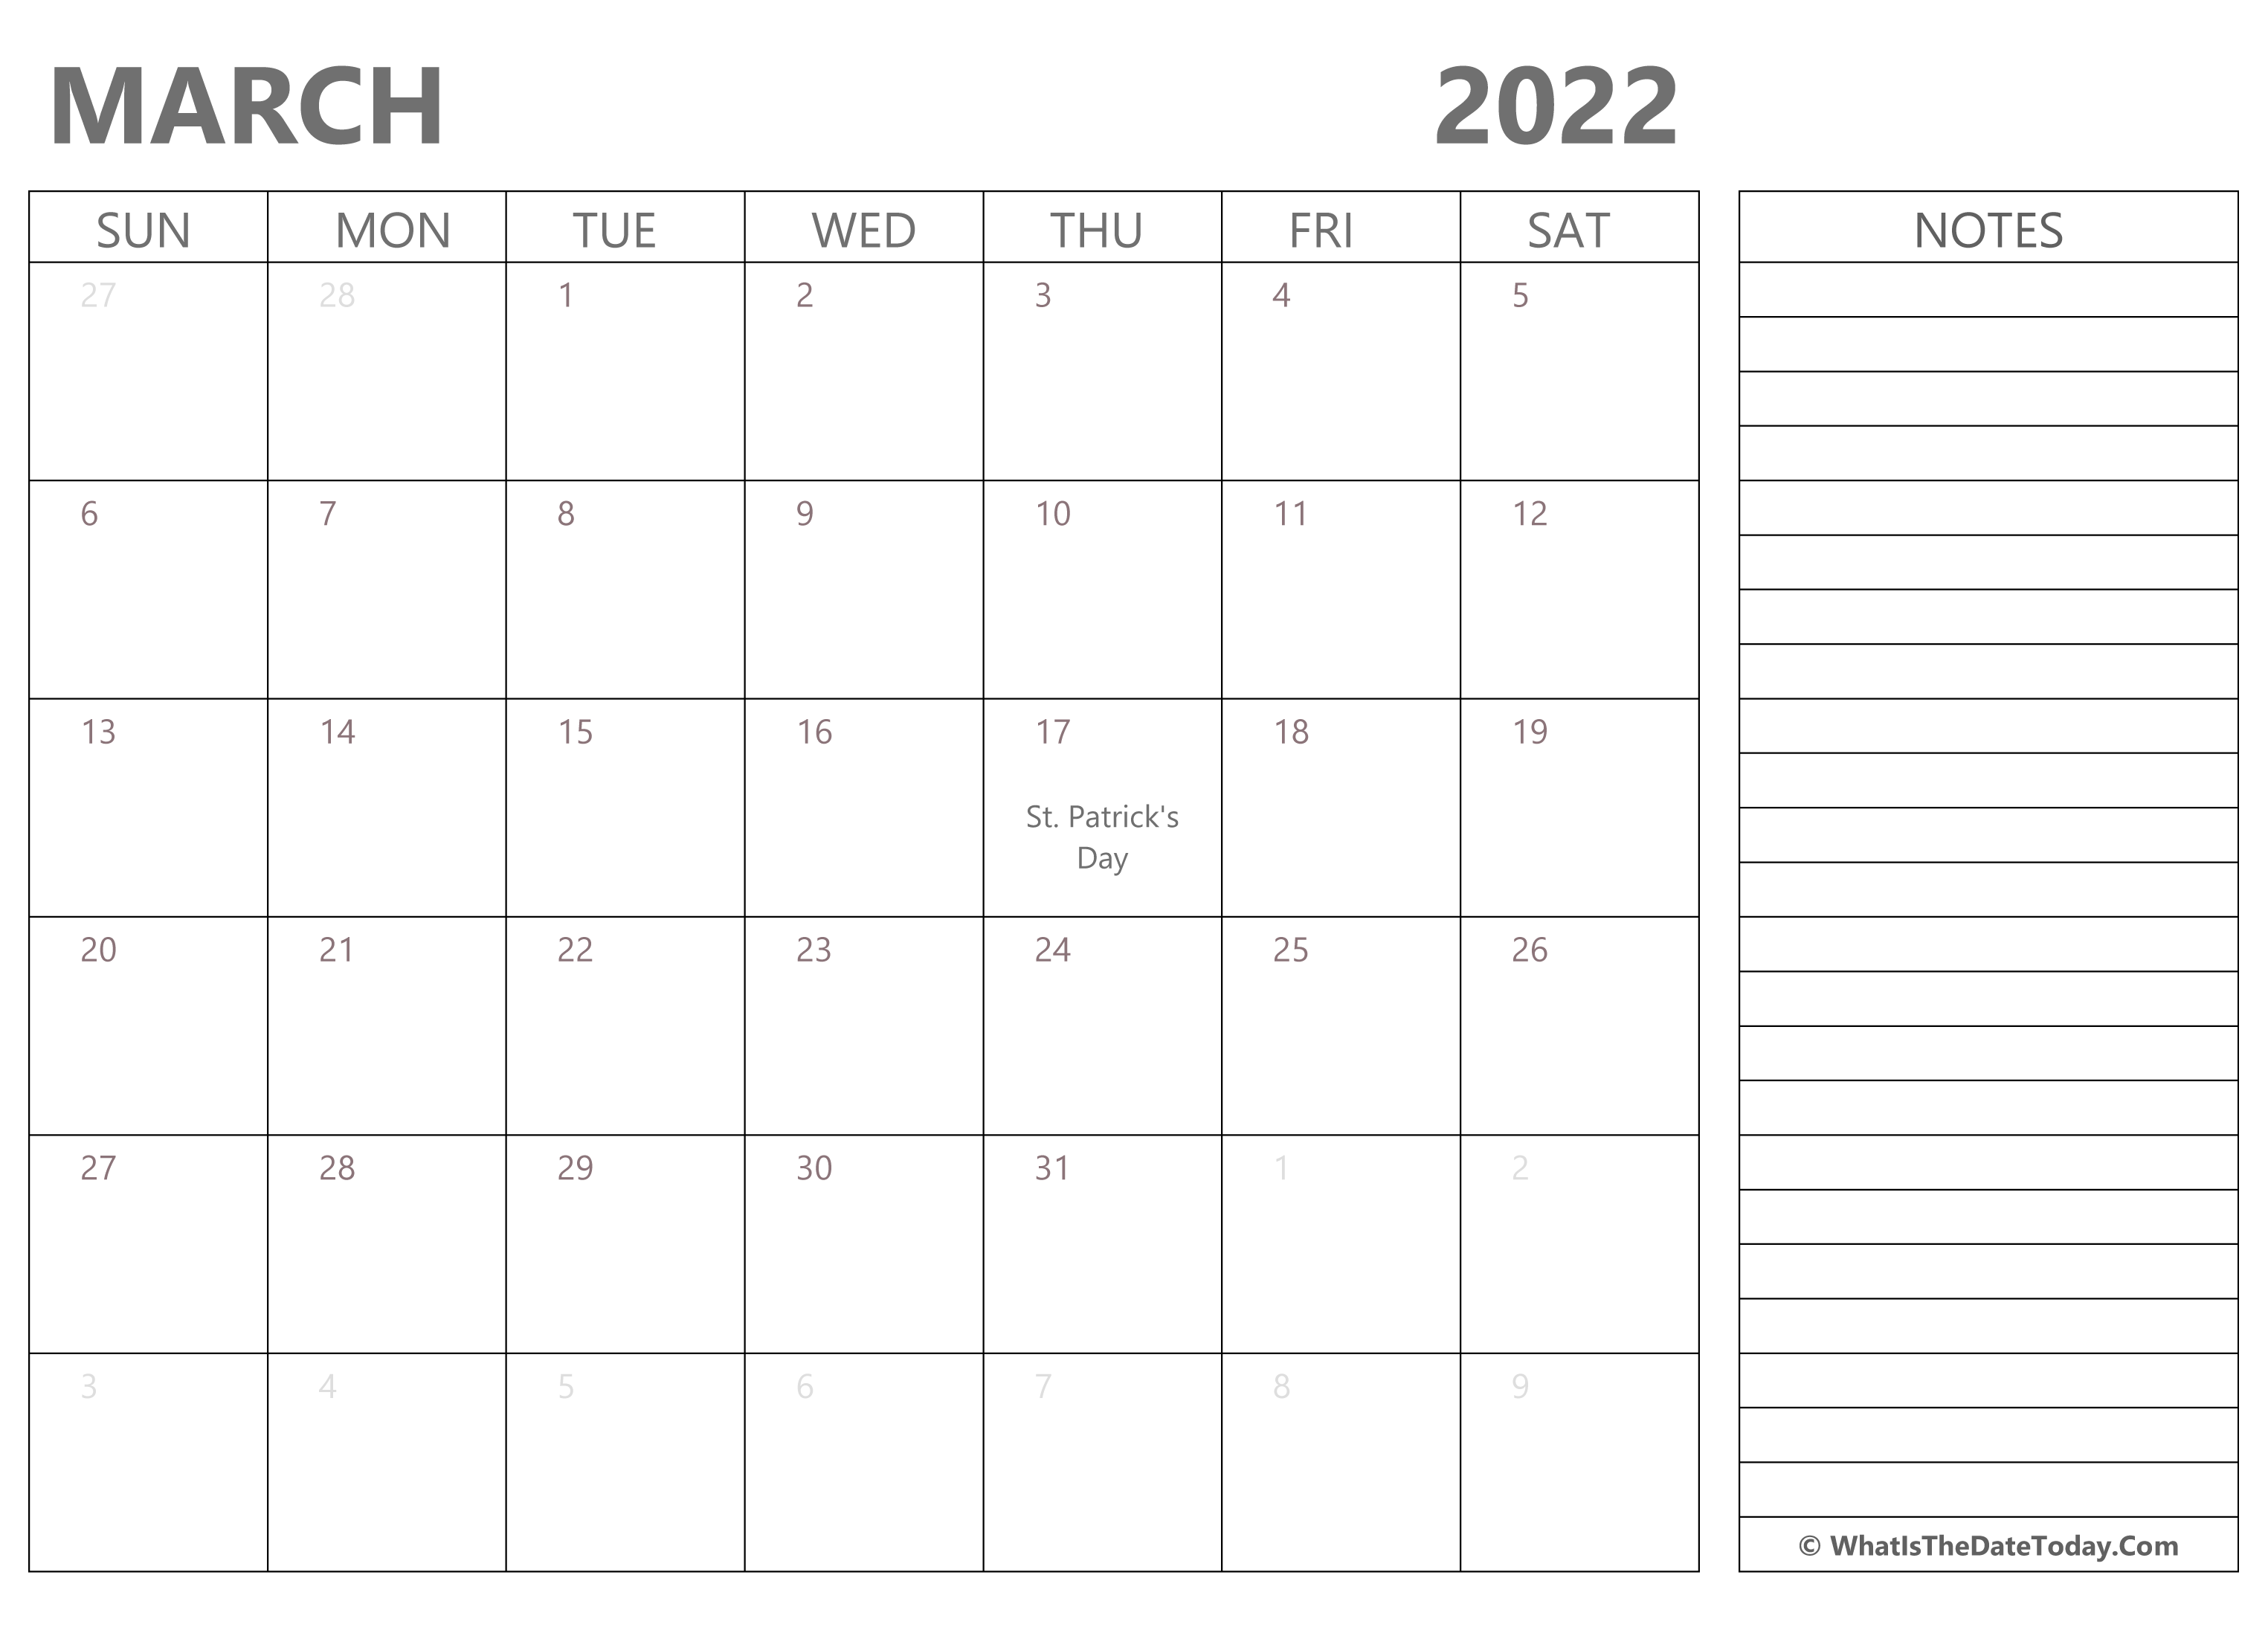 March 2022 Editable Calendar Editable March 2022 Calendar With Holidays And Notes |  Whatisthedatetoday.com